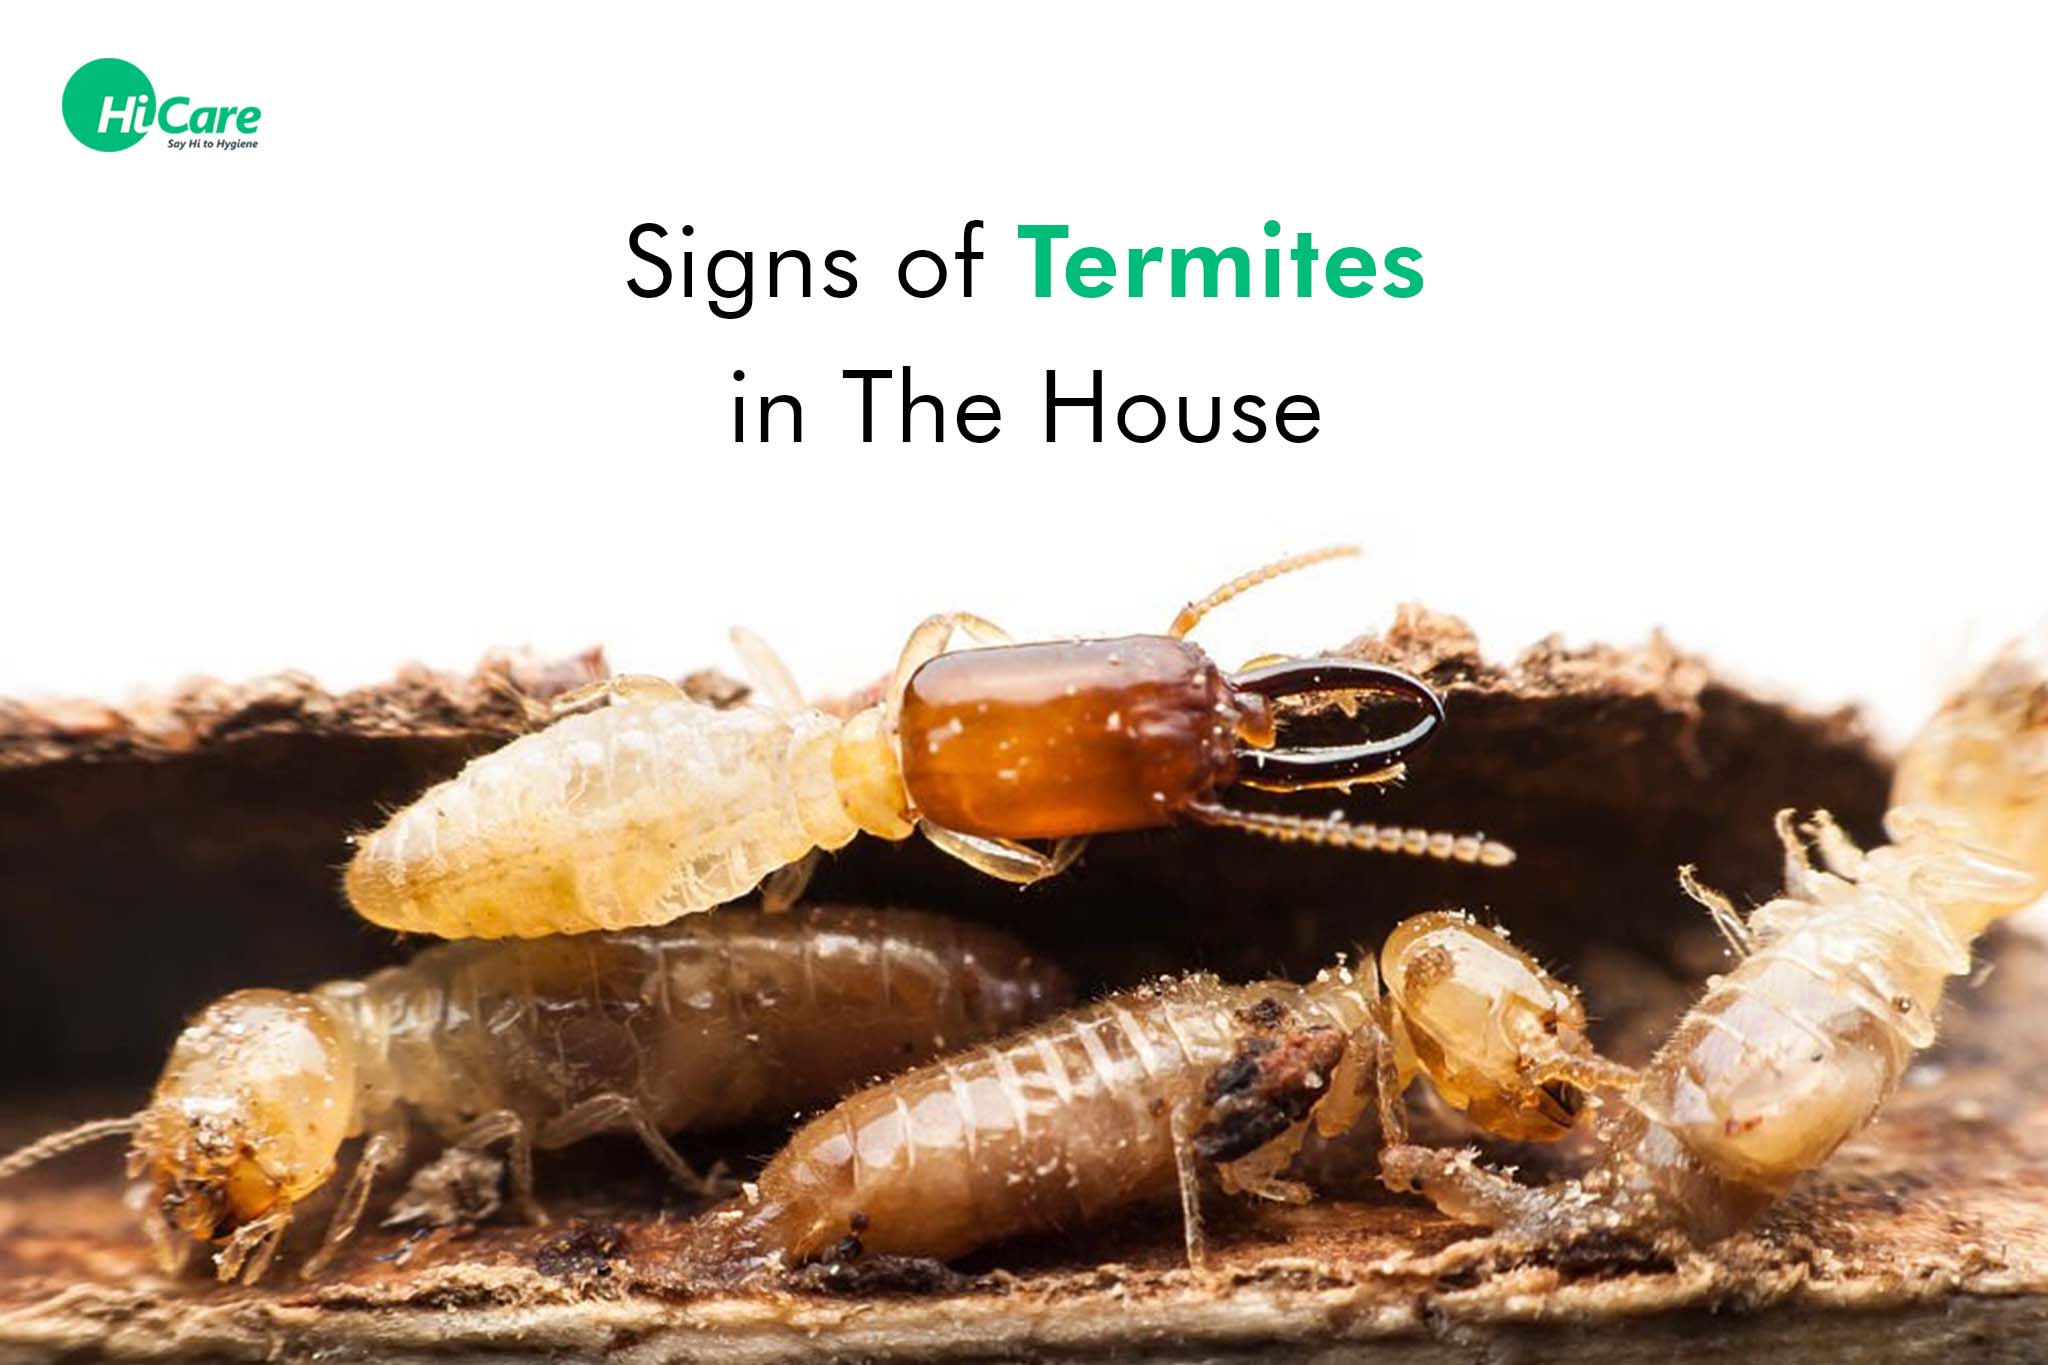 7 Signs of Termites in The House | HiCare